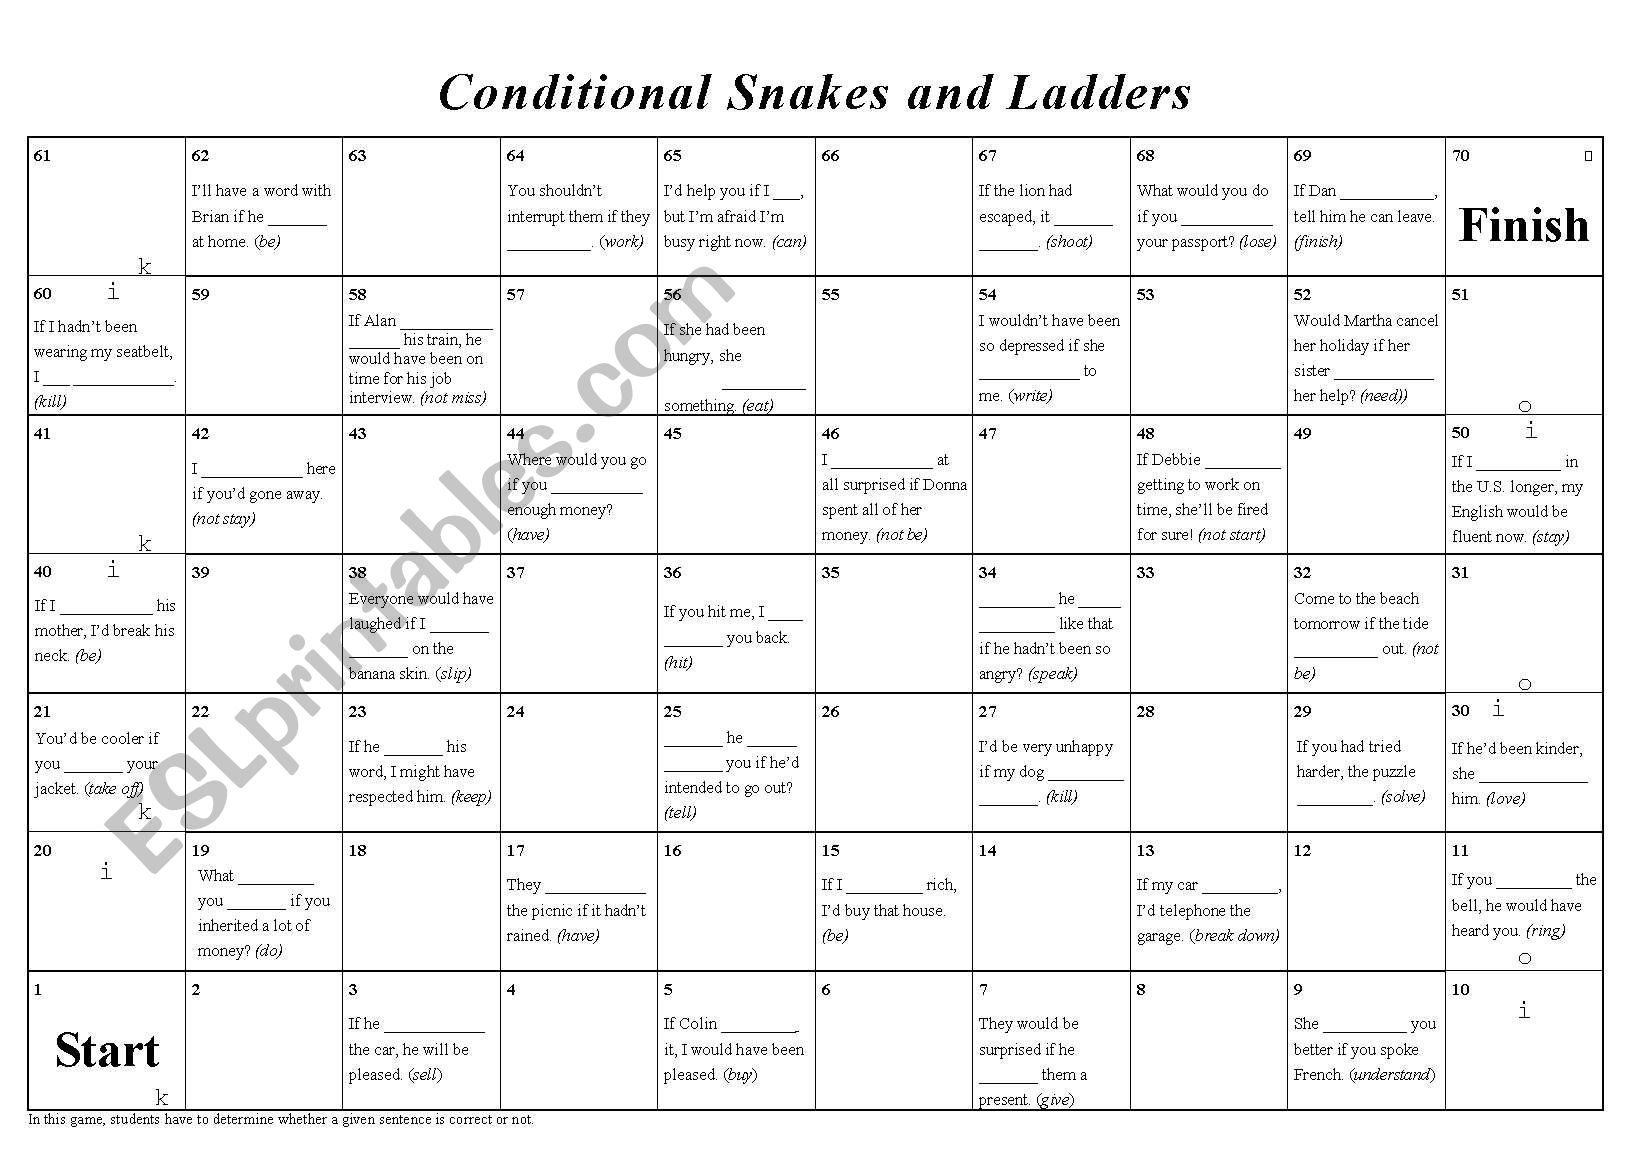 Conditional Snakes & Ladders worksheet